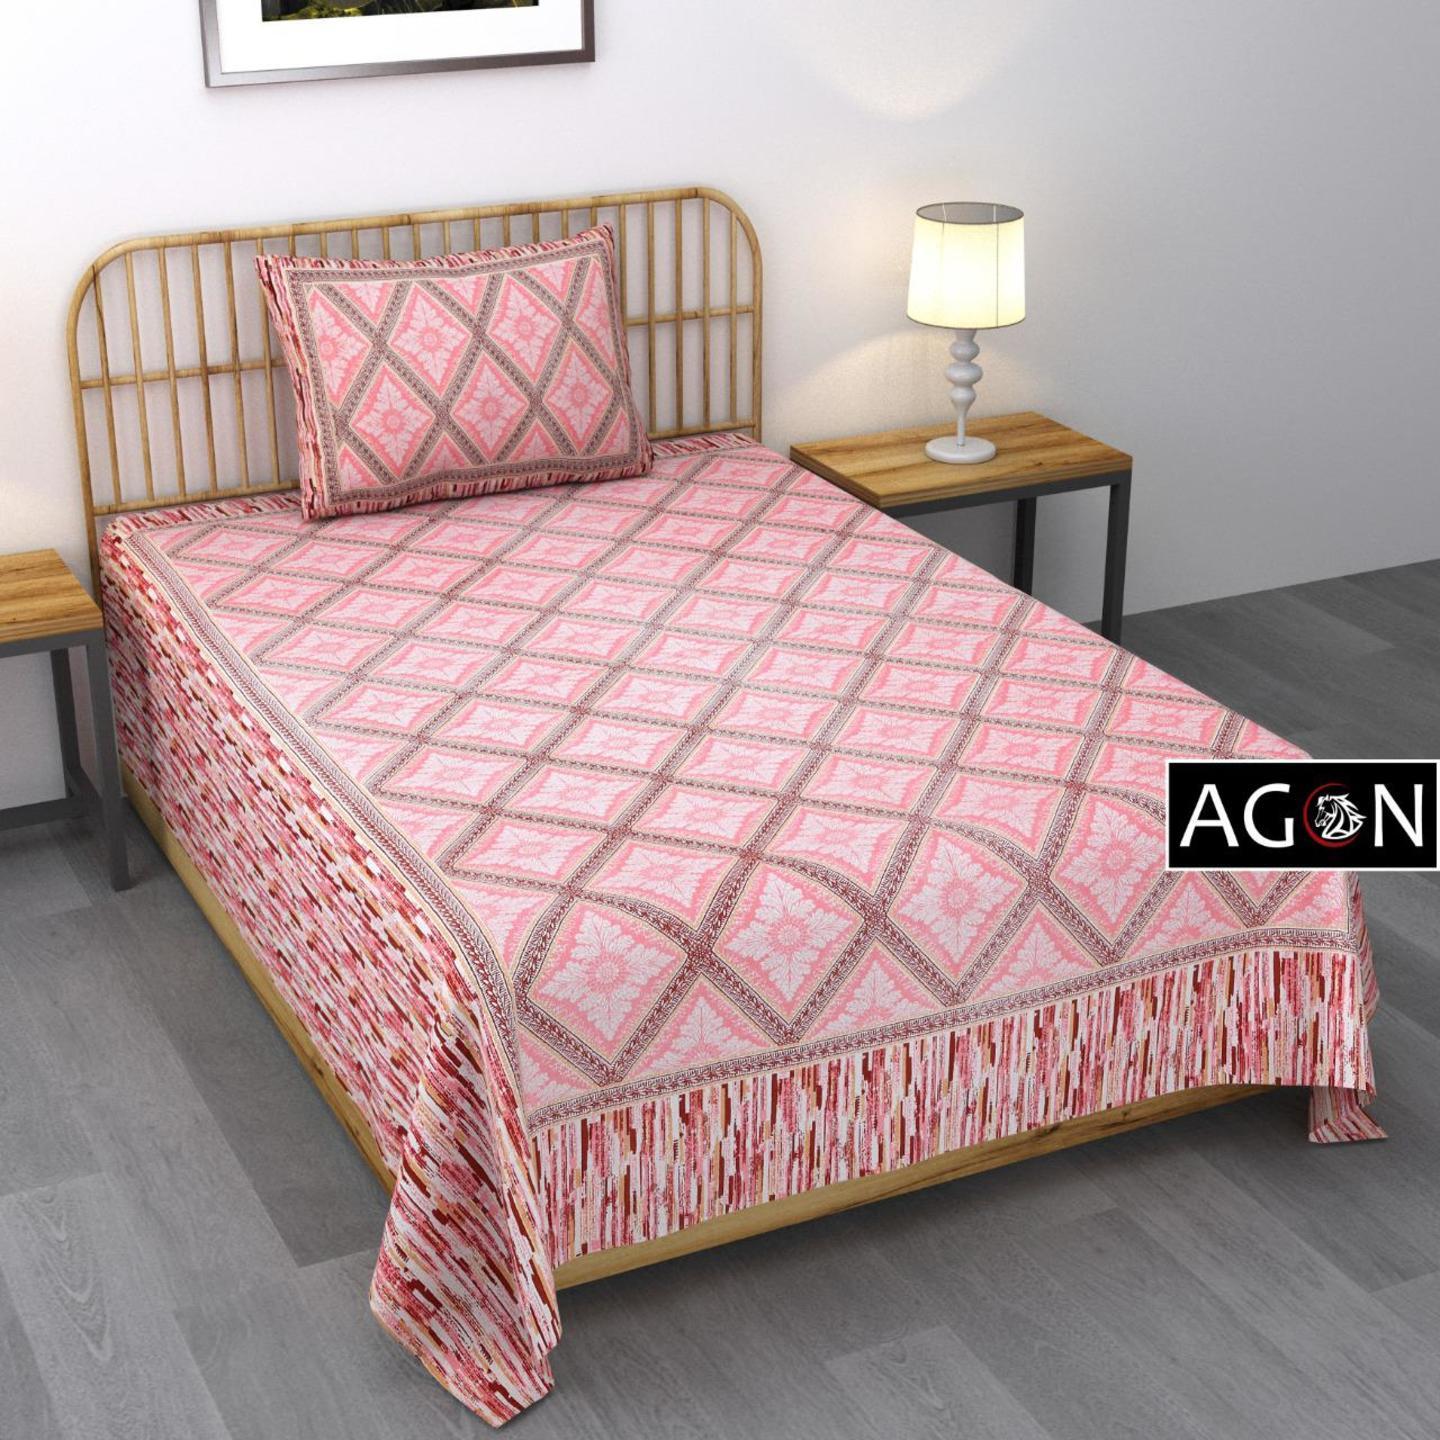 Handtex Home 144 TC Cotton Printed Single Bedsheet with 1 Pillow Cover Pink